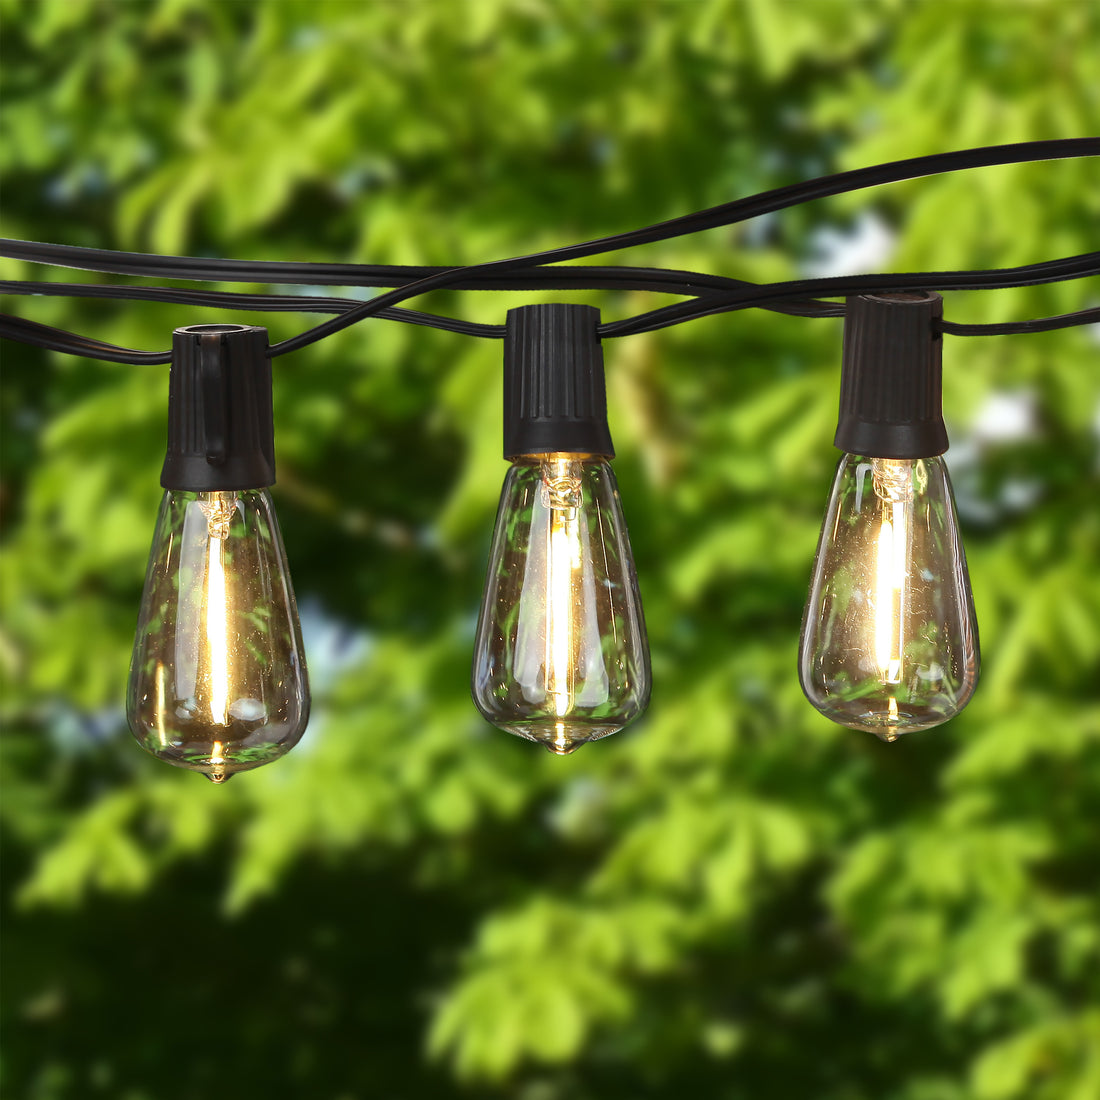 Brightech Ambience Pro Teardrop String Lights - Weatherproof LED Outdoor String Lights - Hanging Dimmable 1W LED Bulbs with Unique Teardrop Bulbs - 26 Ft Commercial Grade Patio Backyard Gazebo